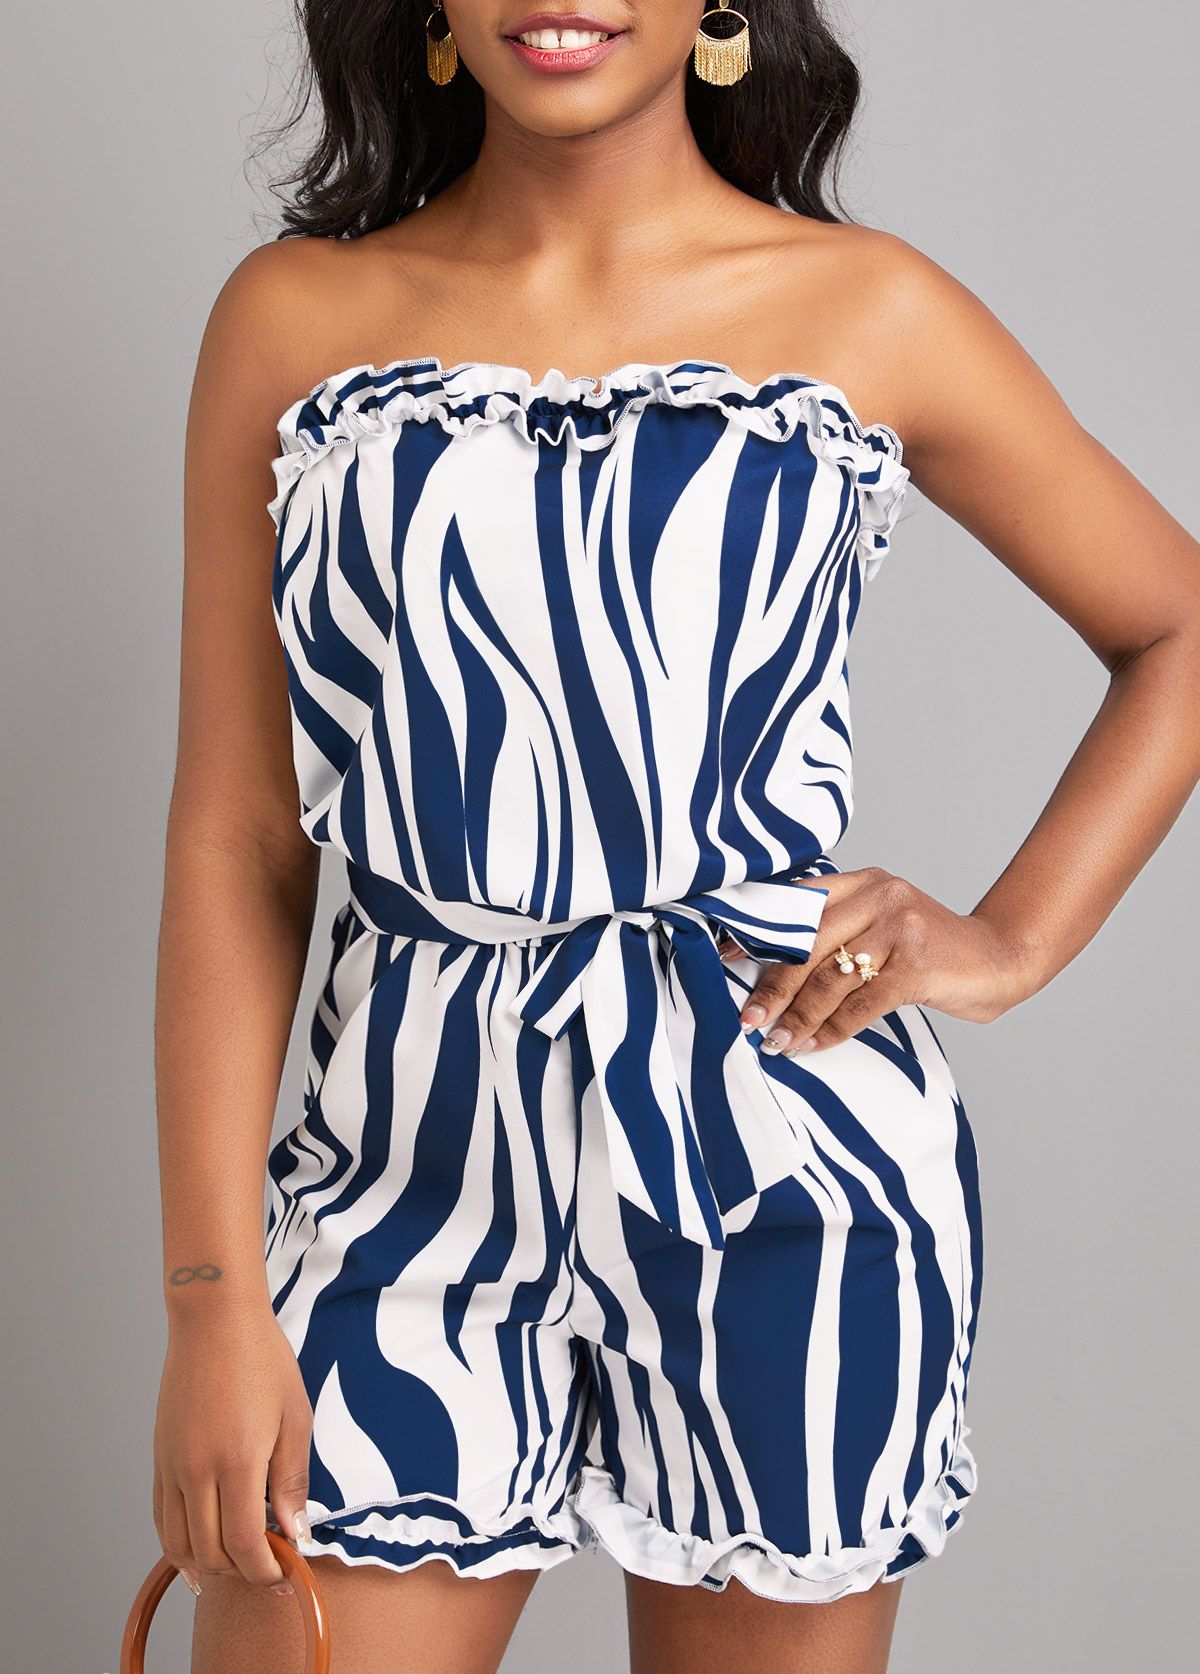 Striped Frill Belted Navy Short Bandeau Sleeveless Romper